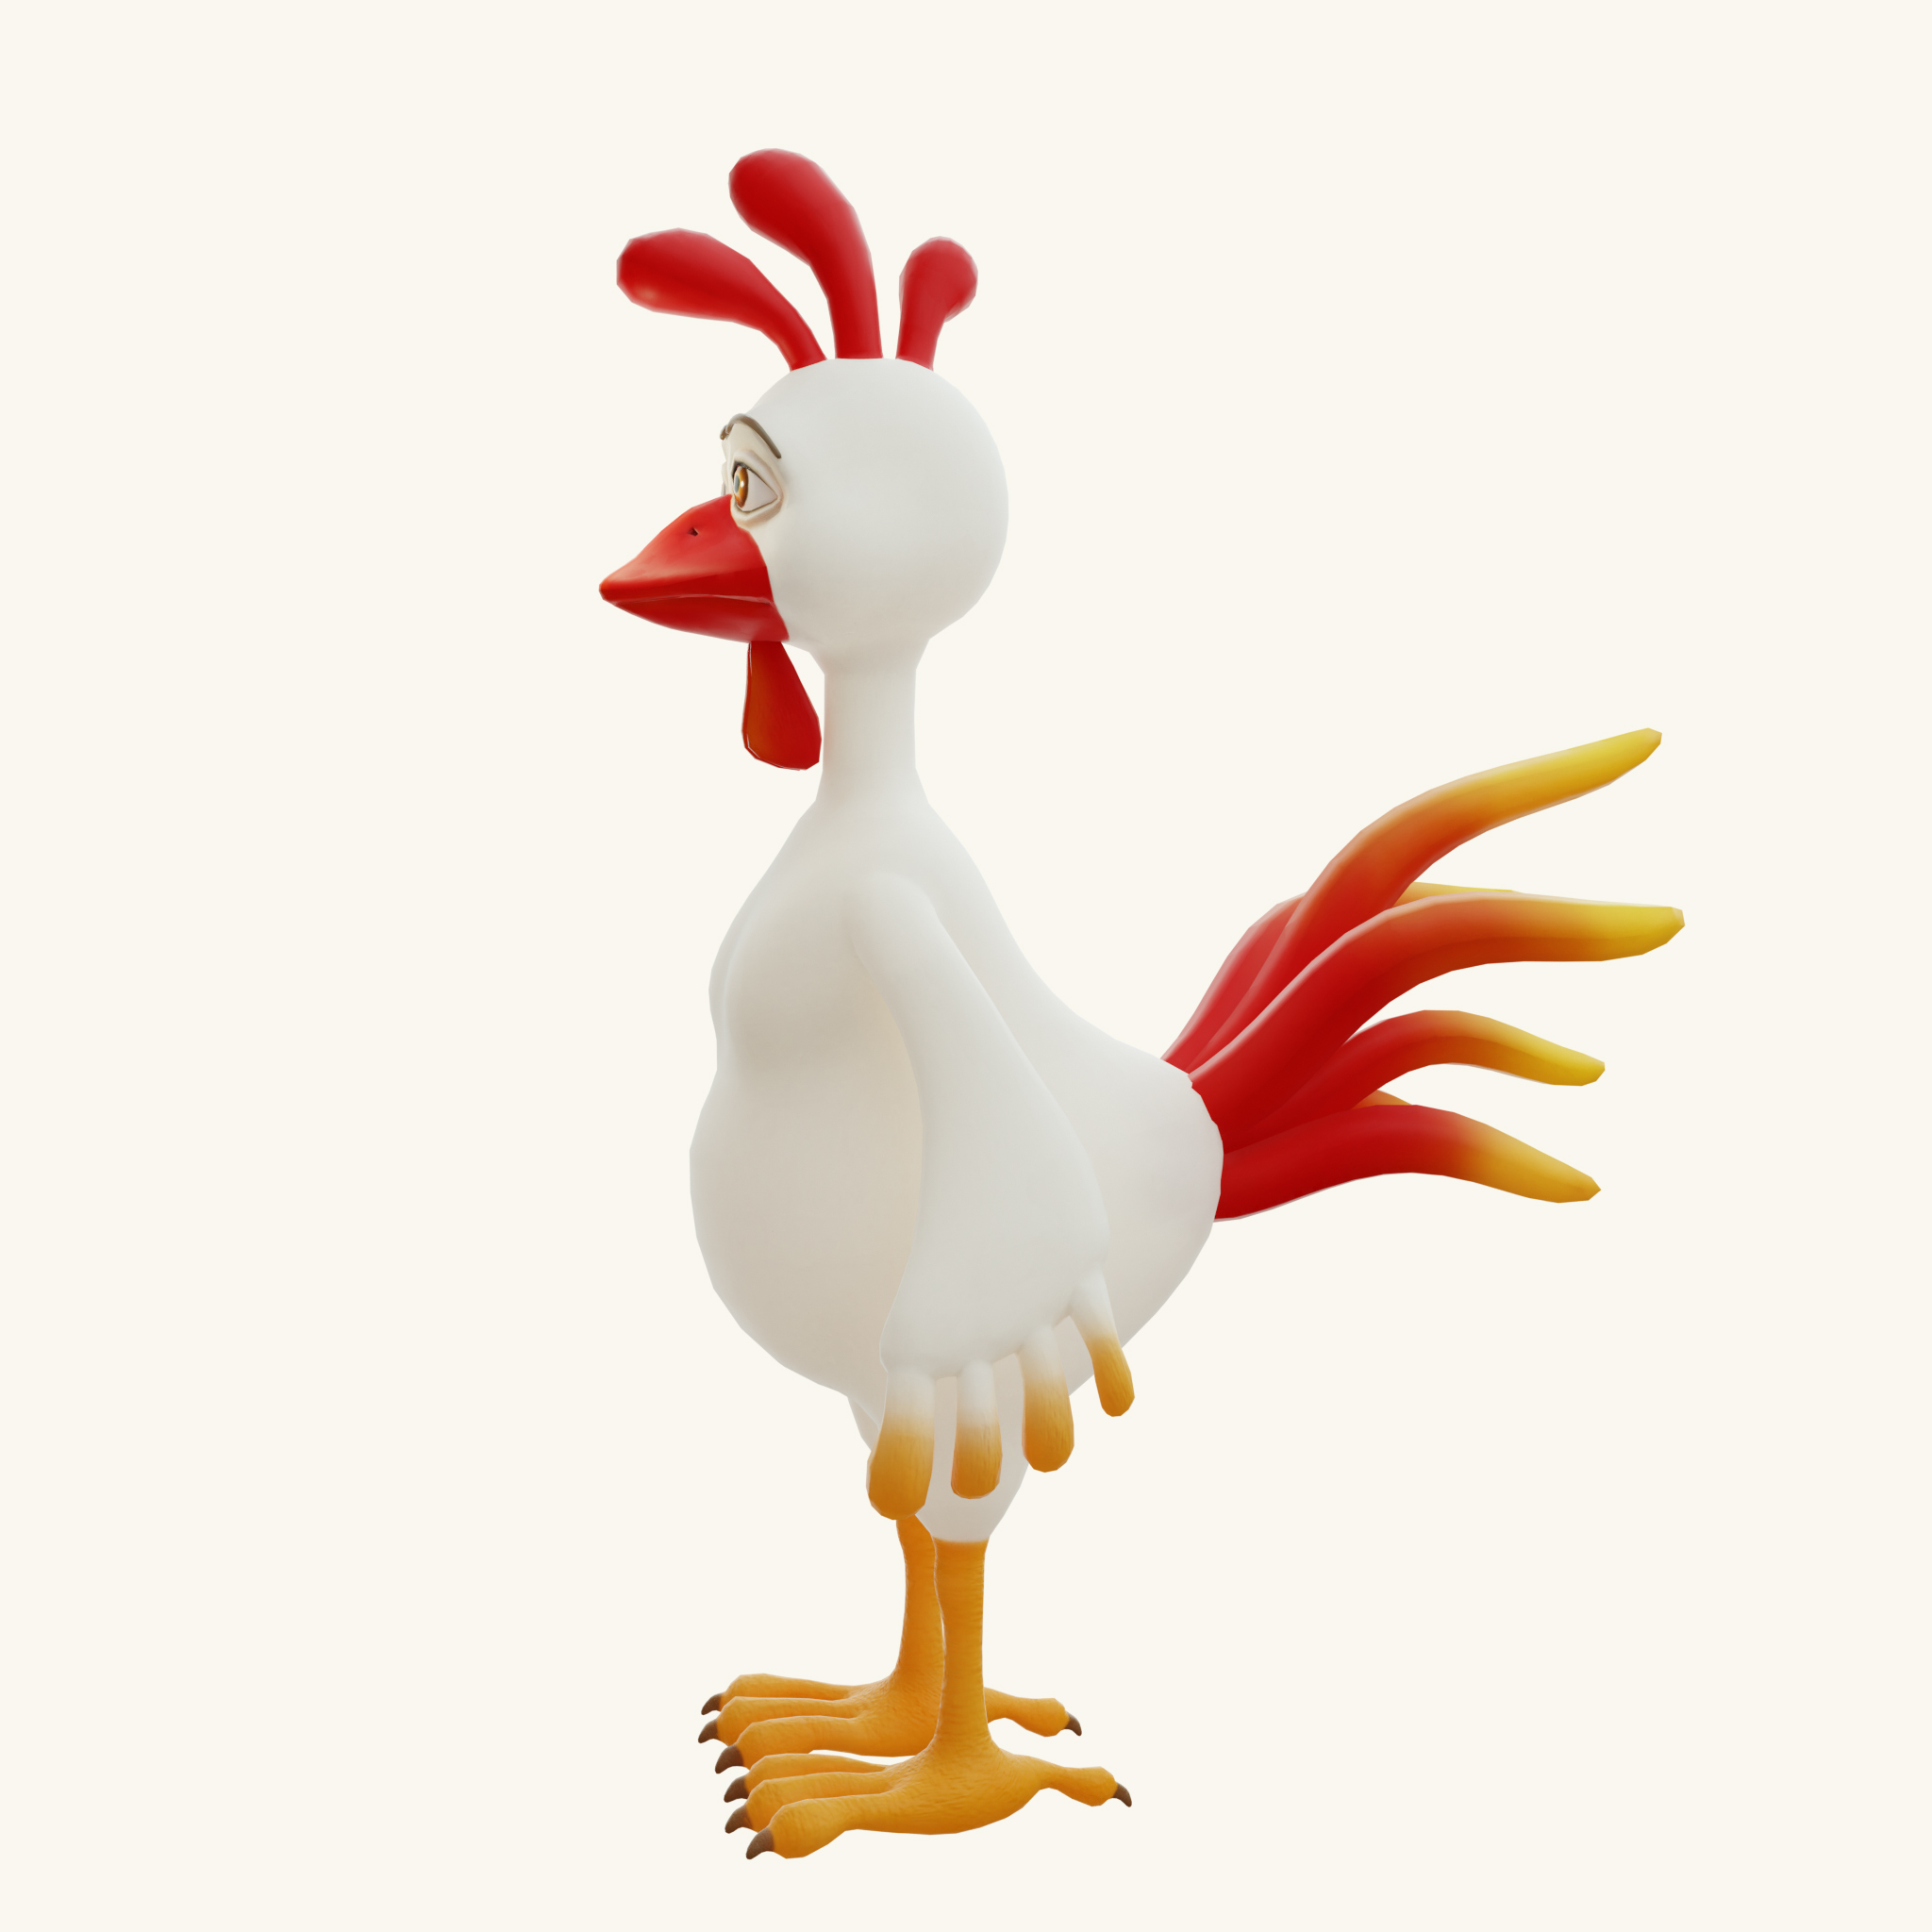 Stylized cartoon rooster 3D - TurboSquid 1603330